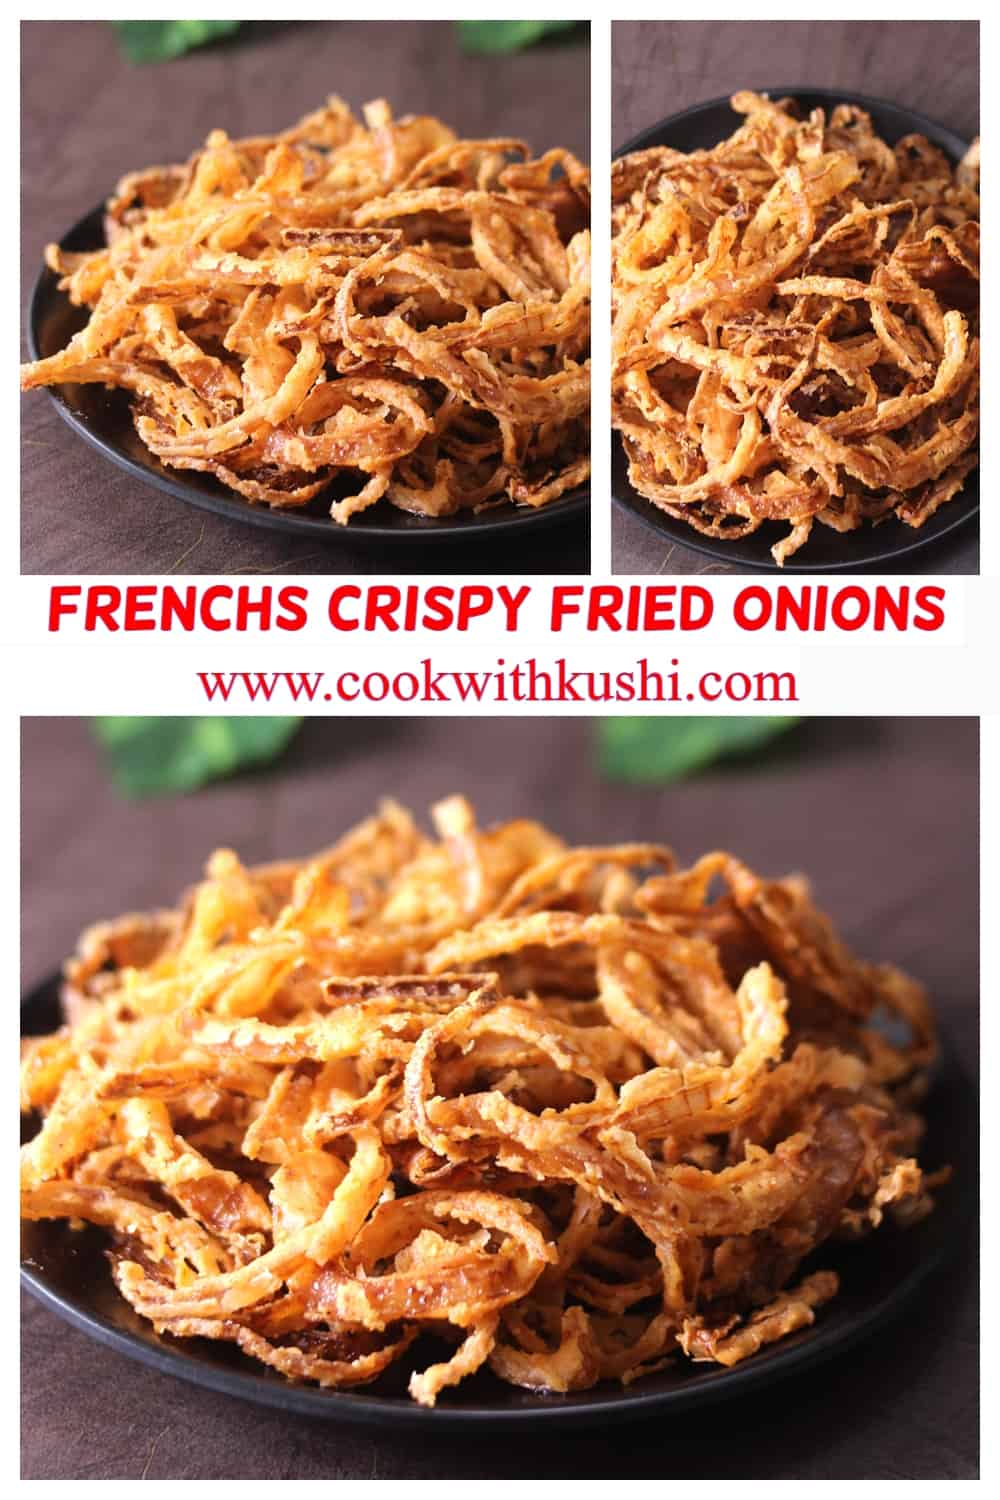 3 different images of copycat Frenchs crispy fried onions 